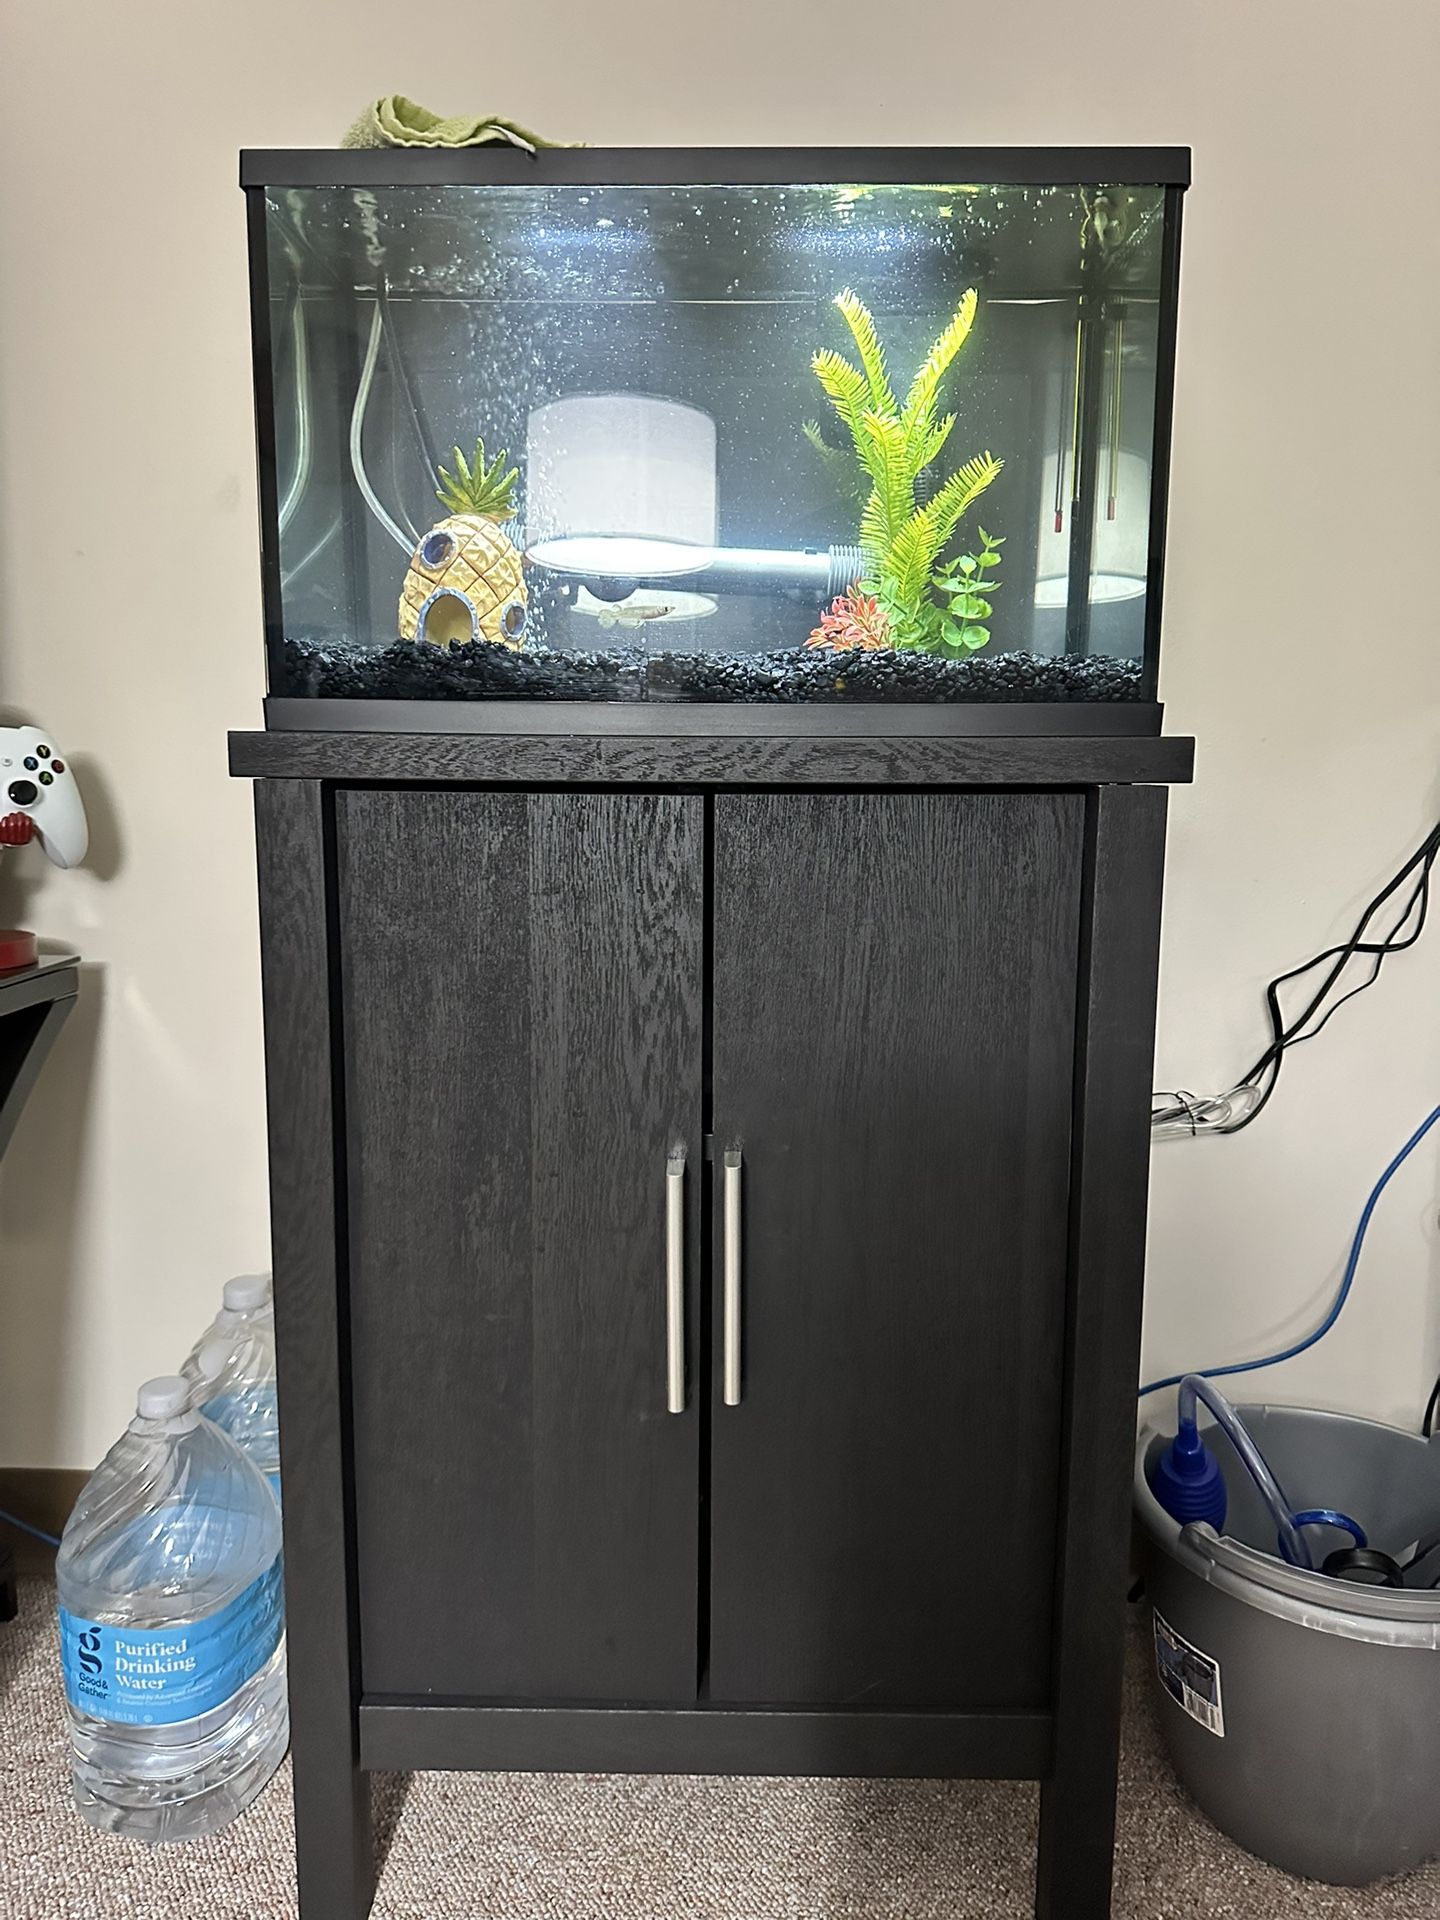 10 Gallon Fish Tank With Stand 